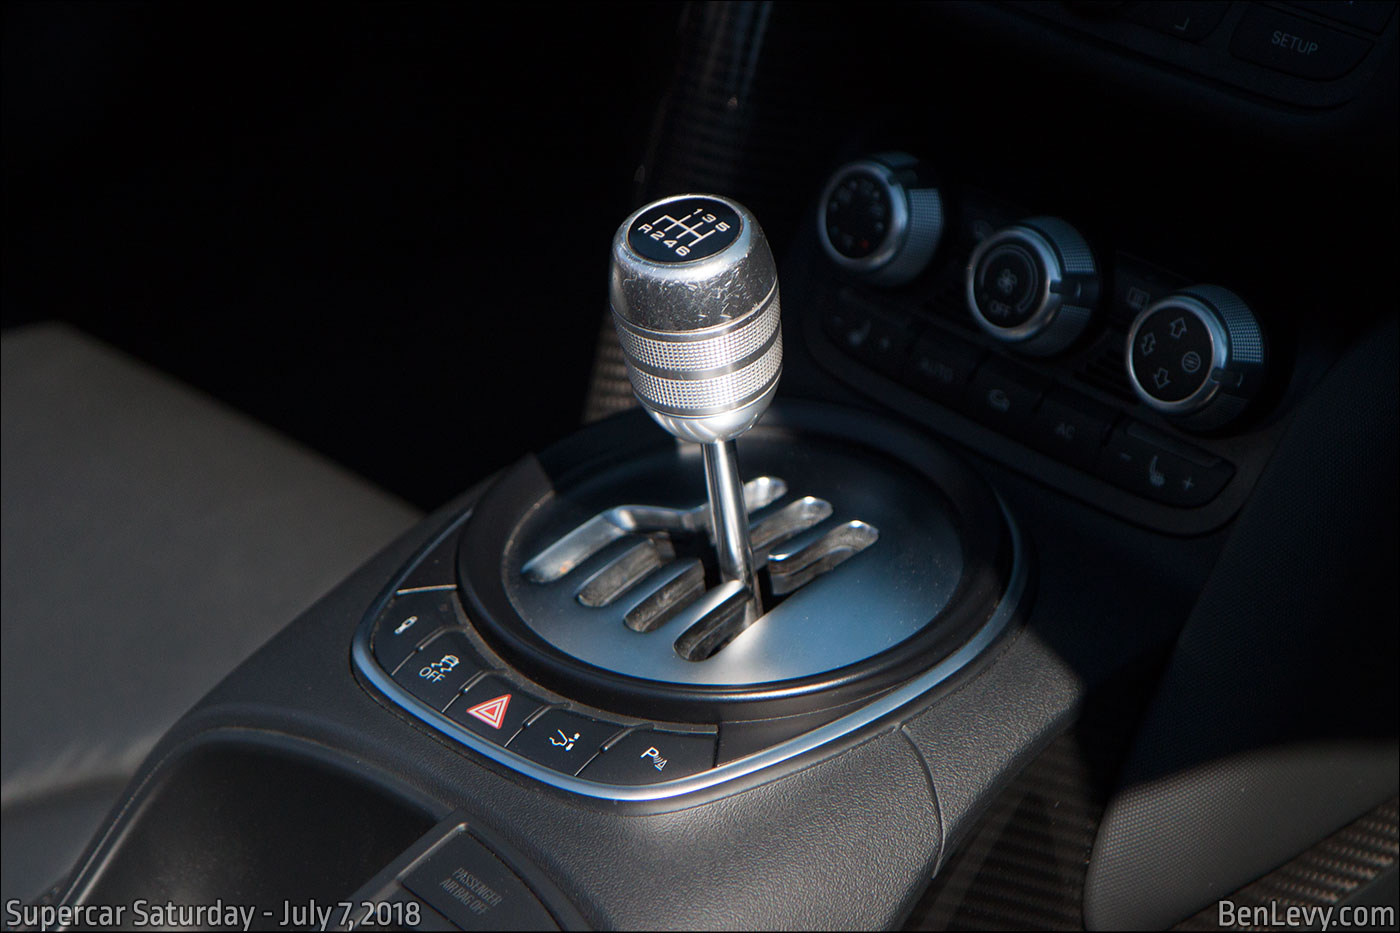 Gated Shifter in Audi R8